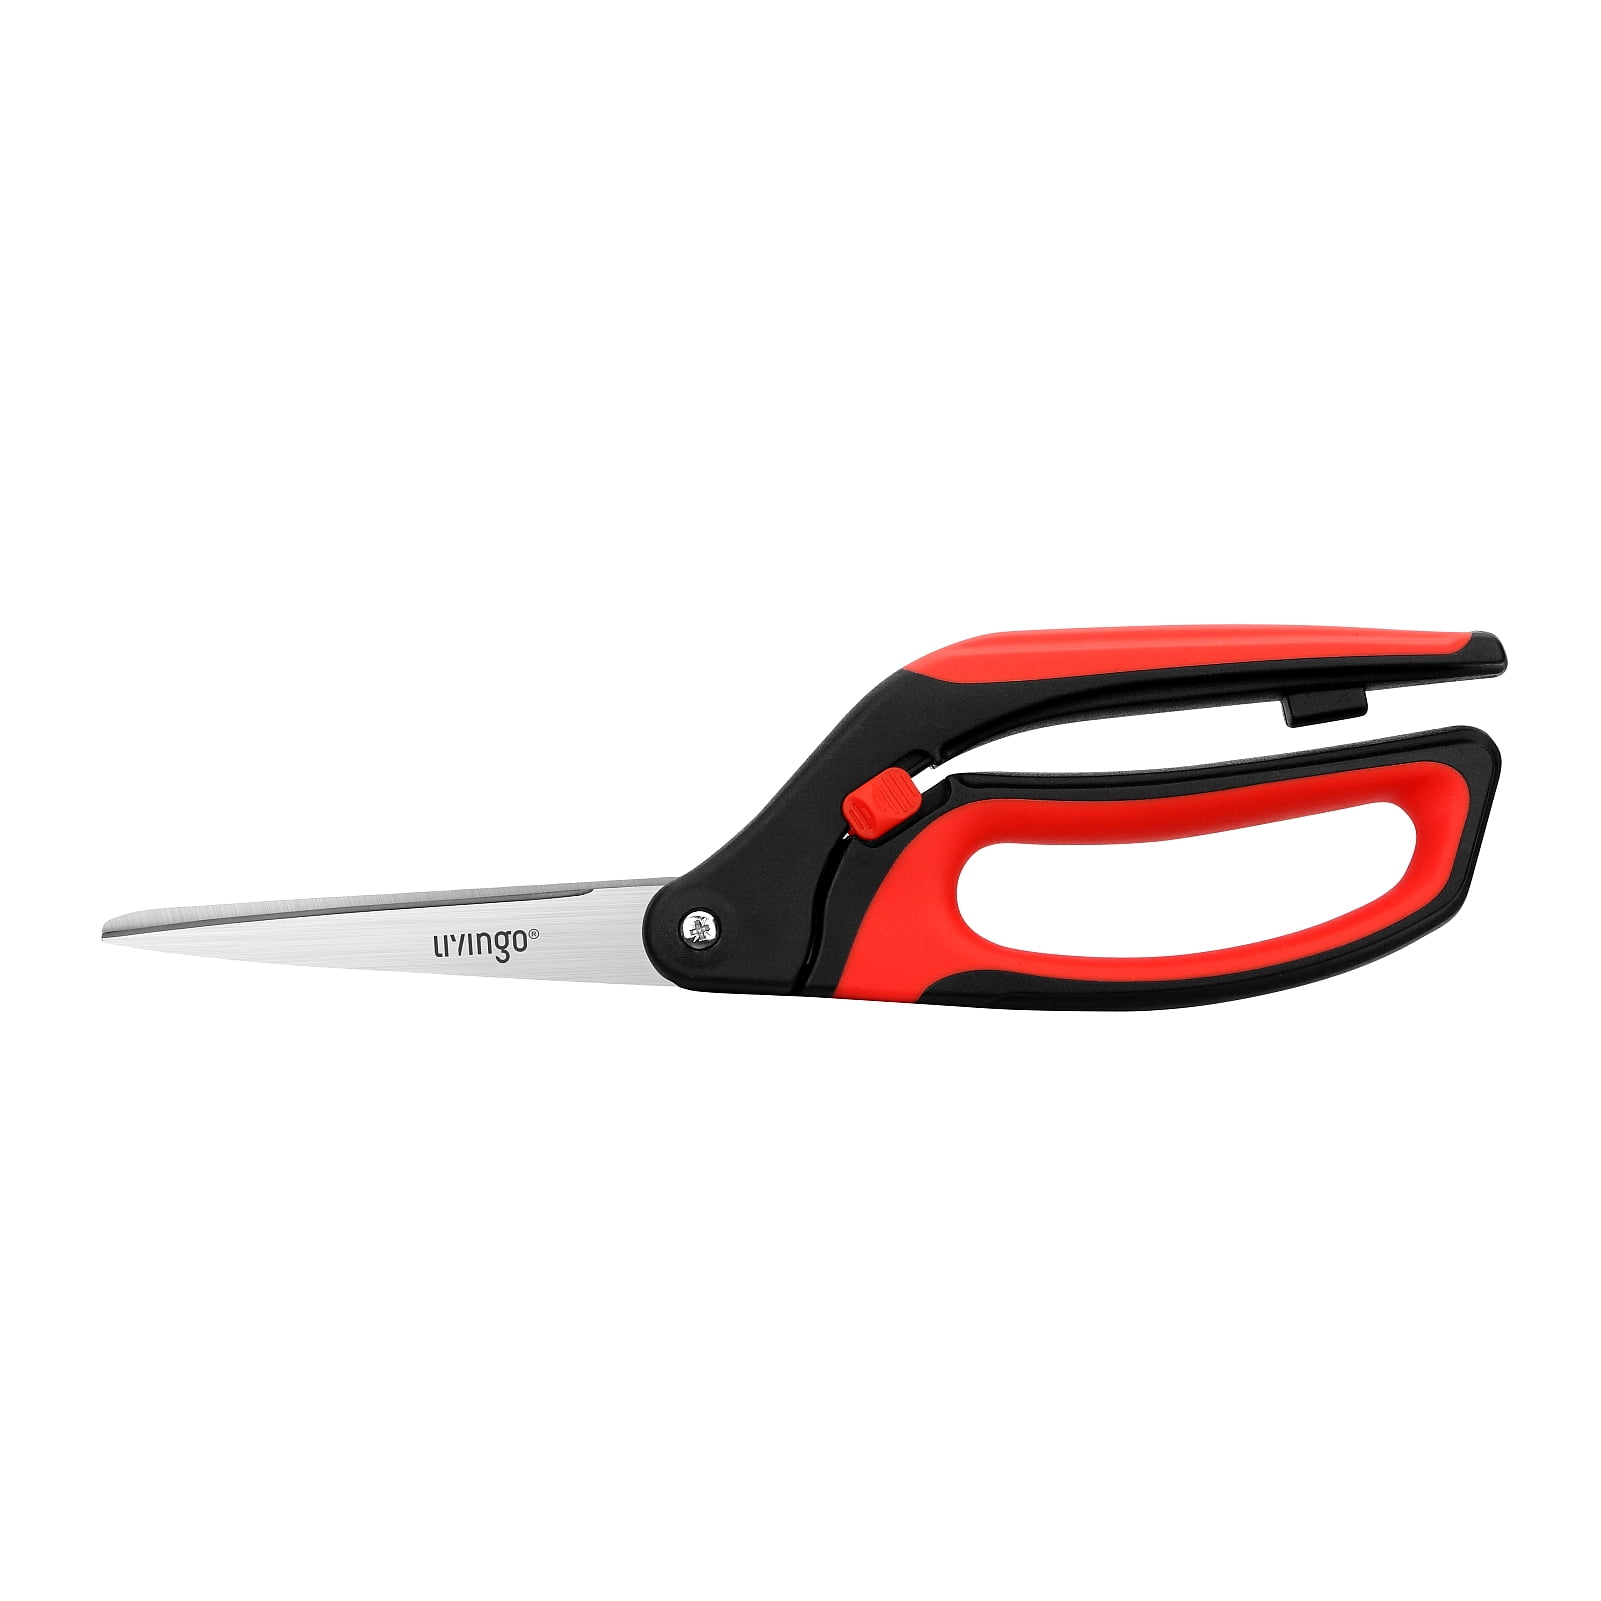 Fiskars Performance 5 Embroidery Scissors - SANE - Sewing and